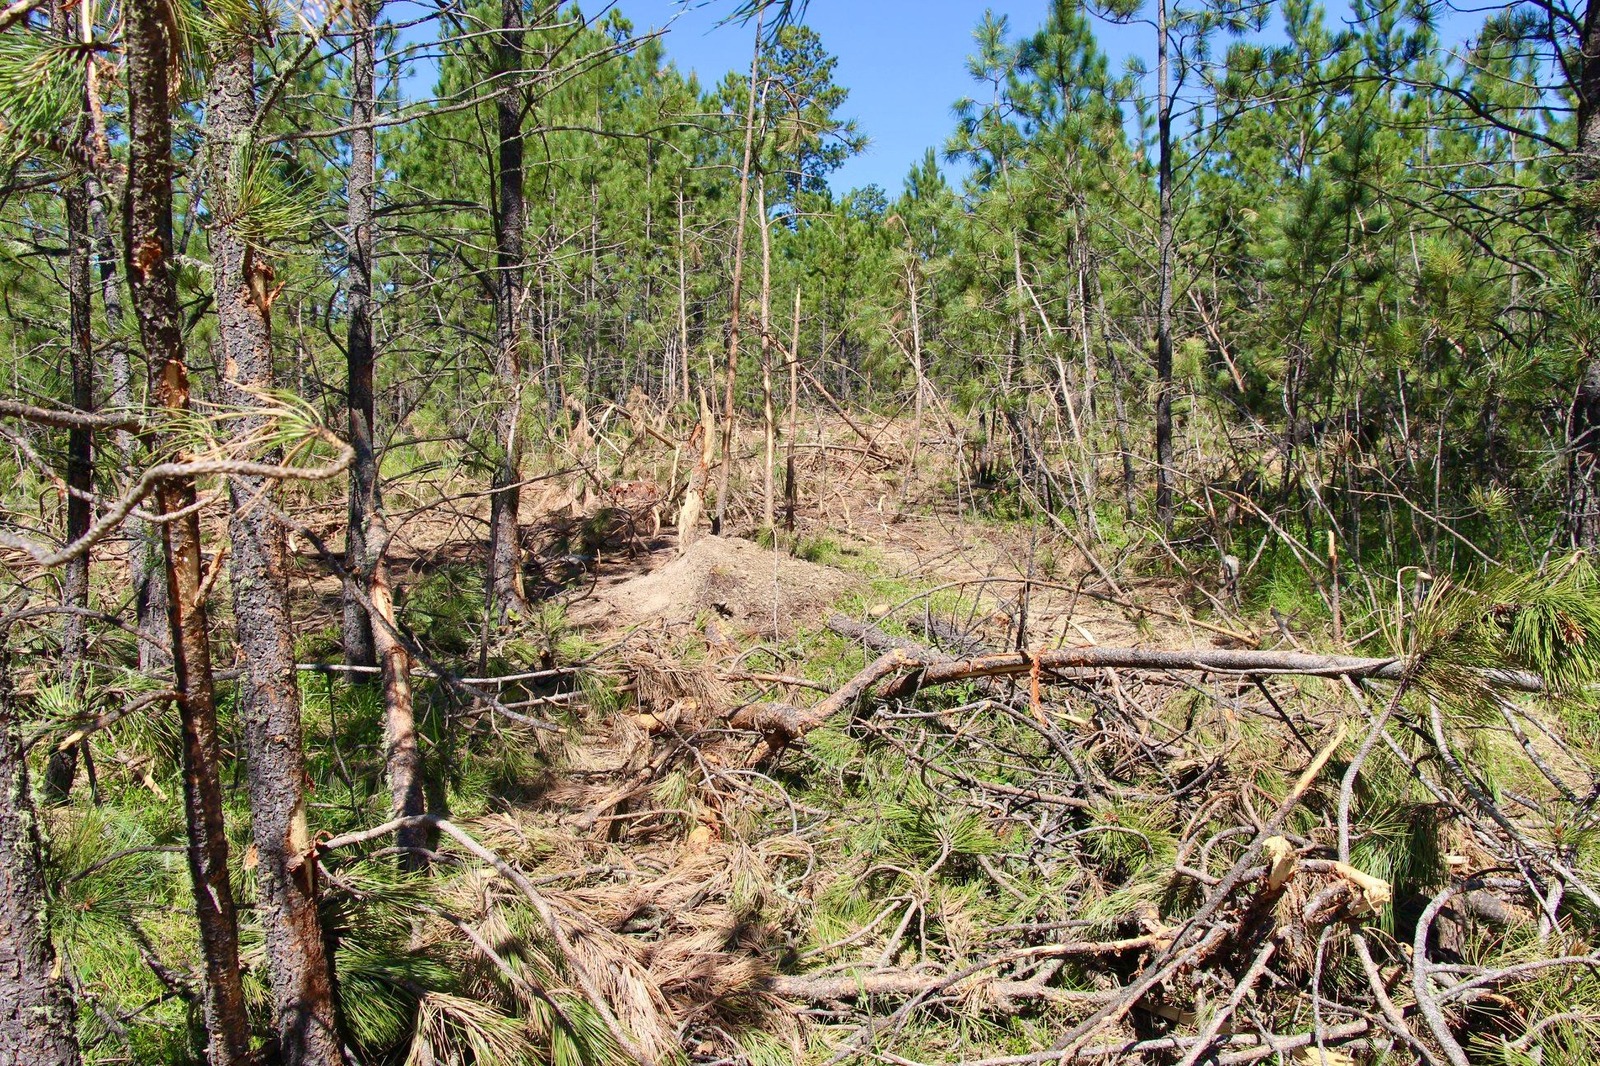 Observes ecologists with the Norbeck Society of this thinning project on the Black Hills National Forest: "This photo shows a 'corridor' where the regeneration has been driven over to retrieve the mature trees. With th removal of the larger trees, the remaining smaller trees will grow a little faster, but will soon stagnate into the kind of area that attracts mountain pine beetle infestation. It is already a fire hazard."